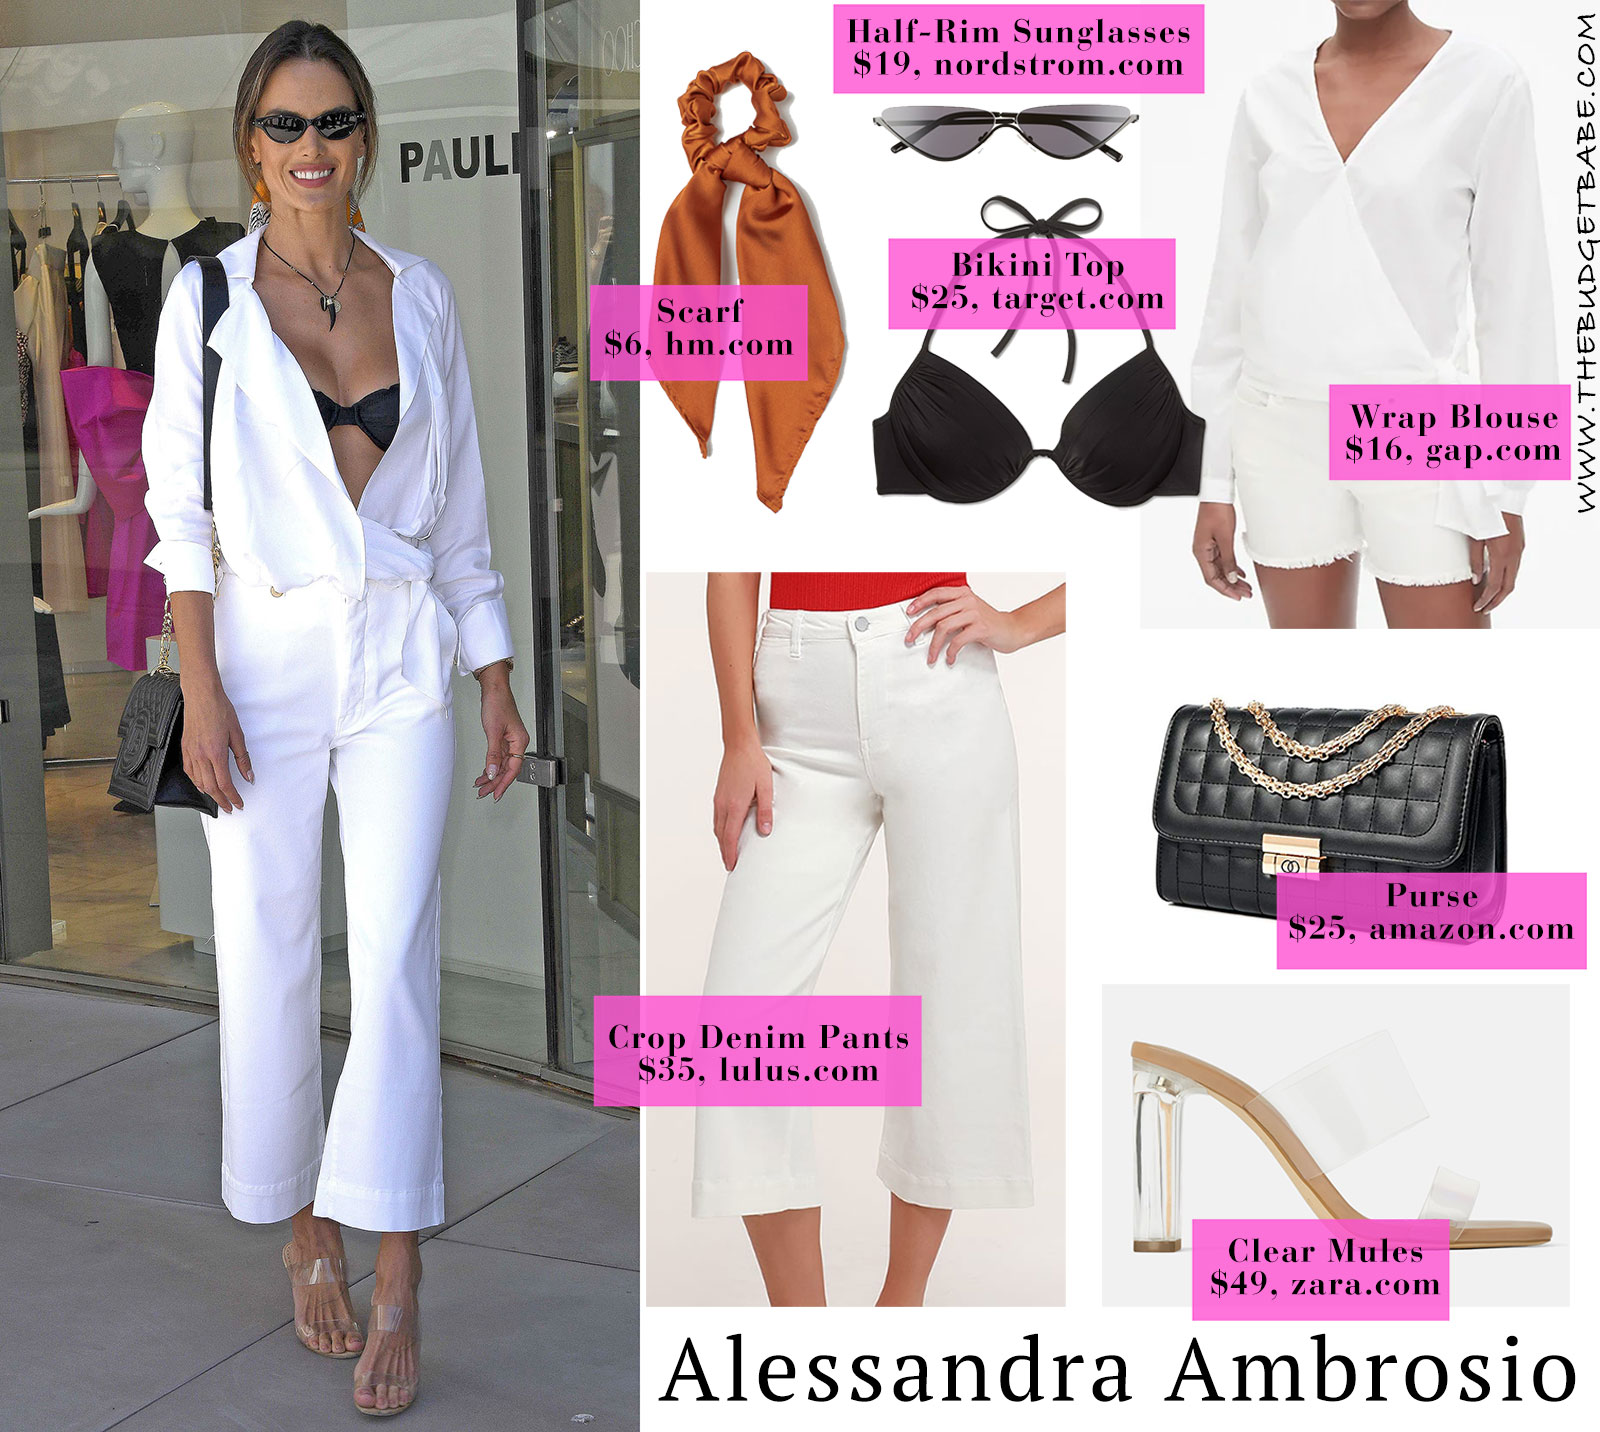 Alessandra Ambrosio's white top and crop jeans look for less